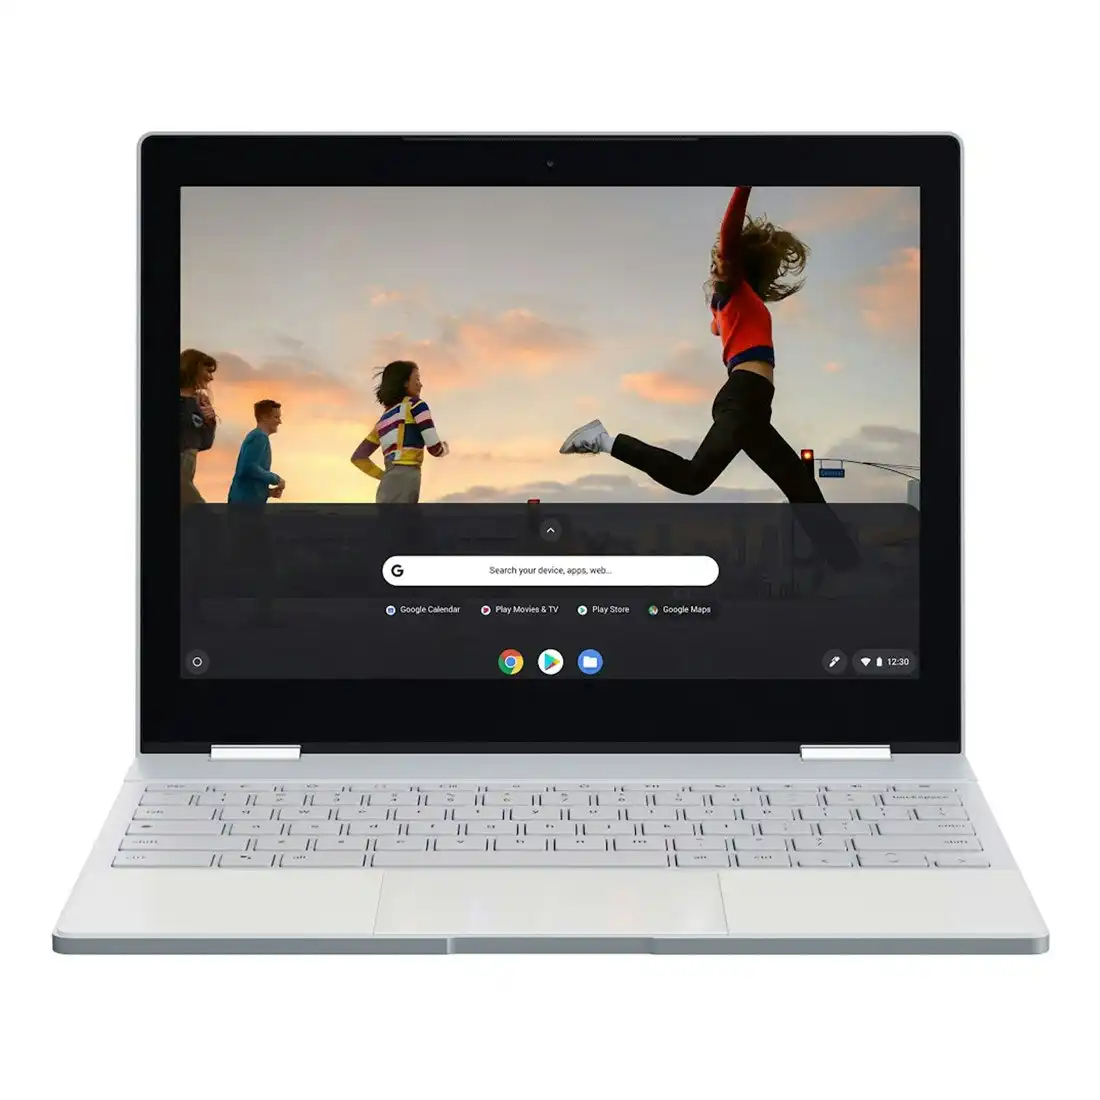 Google Pixelbook Touchscreen (i5, 128GB/8GB, Global Version) Silver [Refurbished] - Excellent